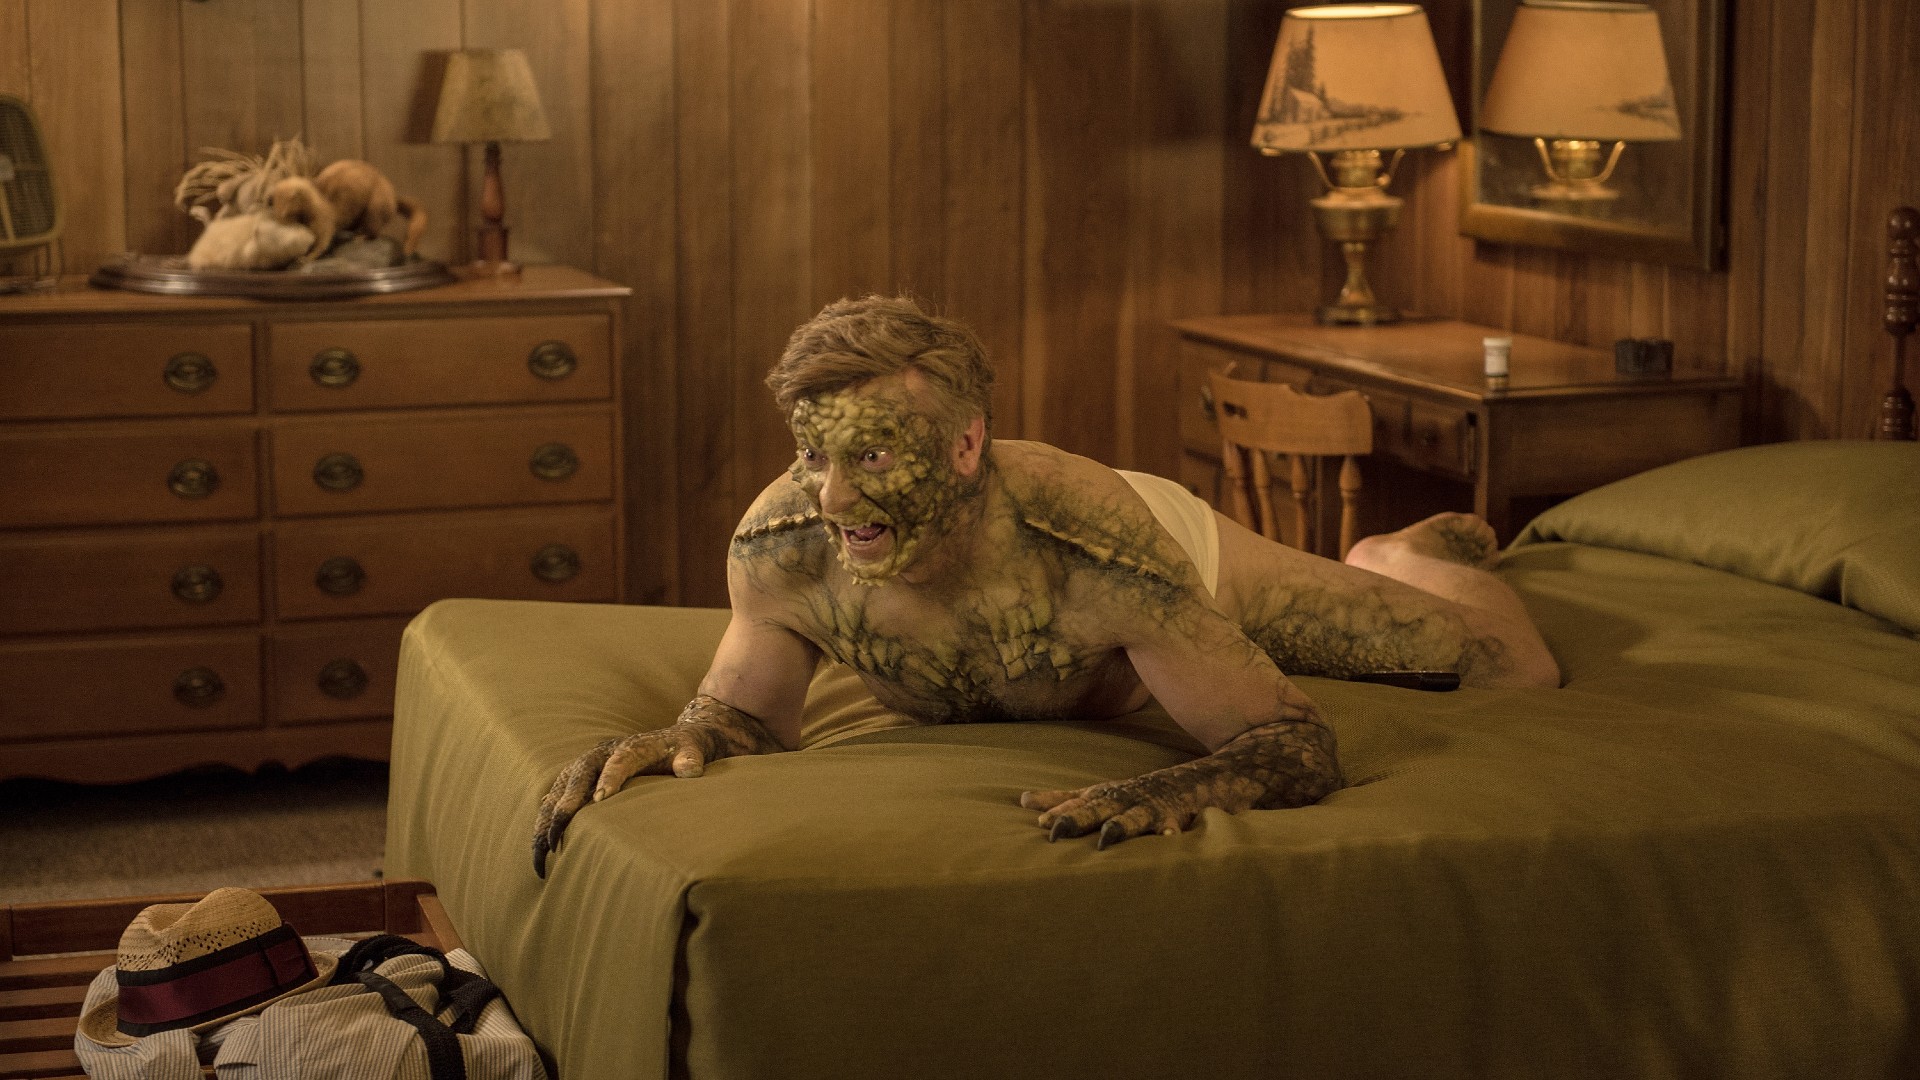 Rhys Darby turns into a Lizard Man on a bed